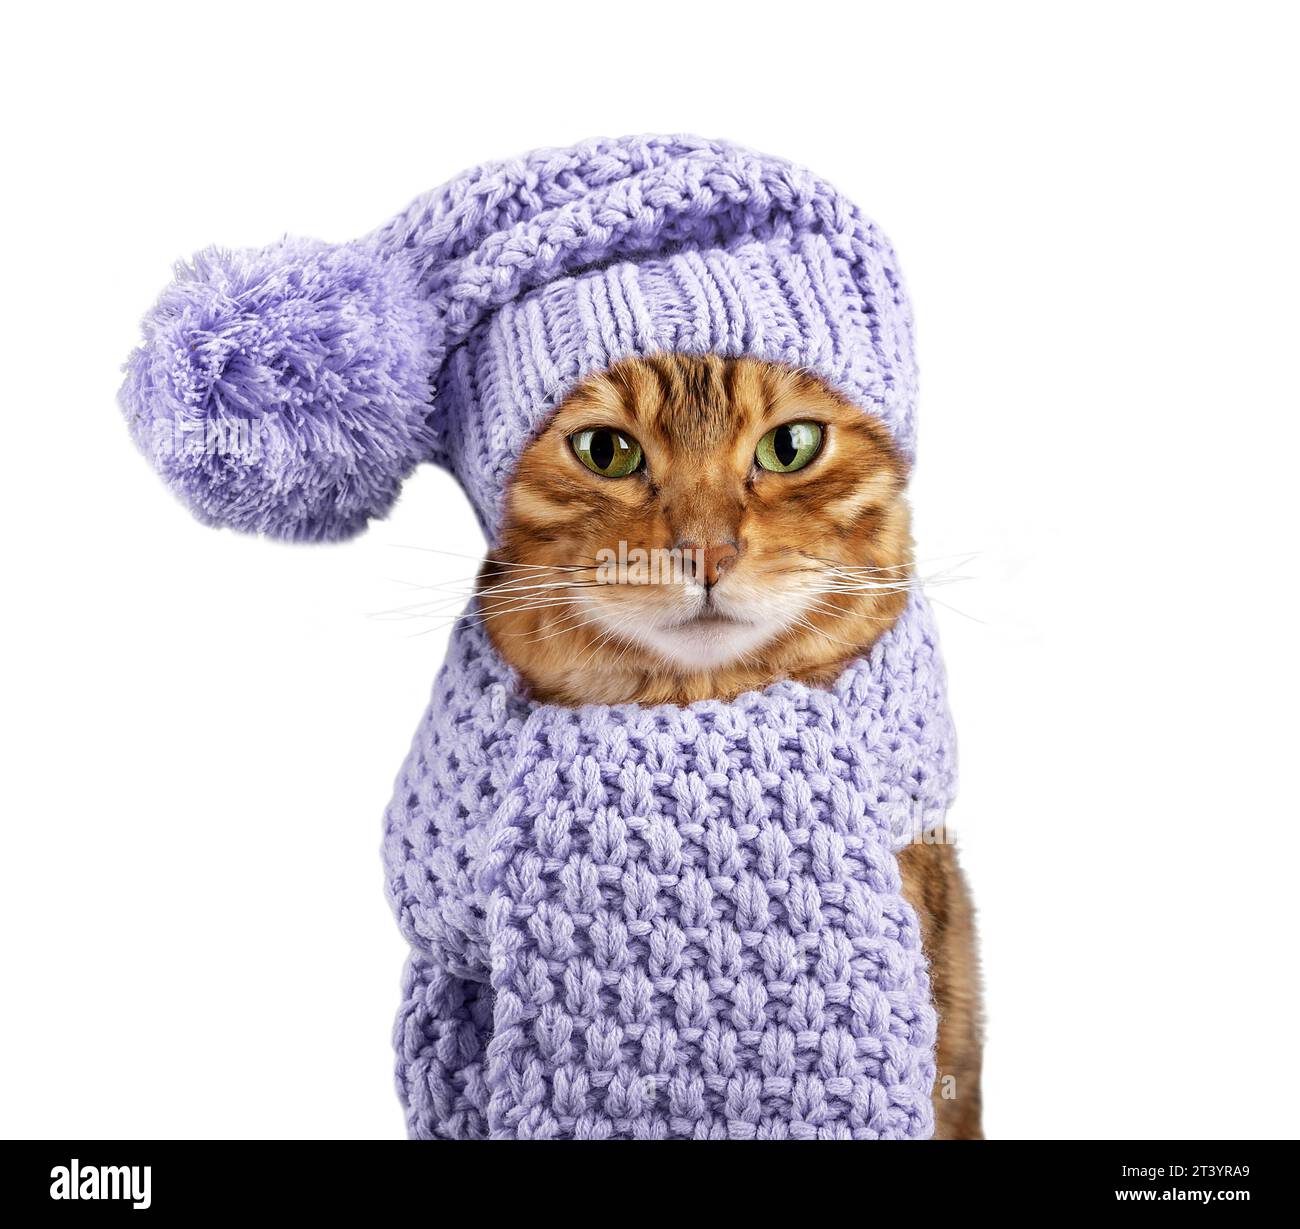 Bengal cat in a warm knitted hat and scarf on a white background. Cat in clothes isolated. Stock Photo